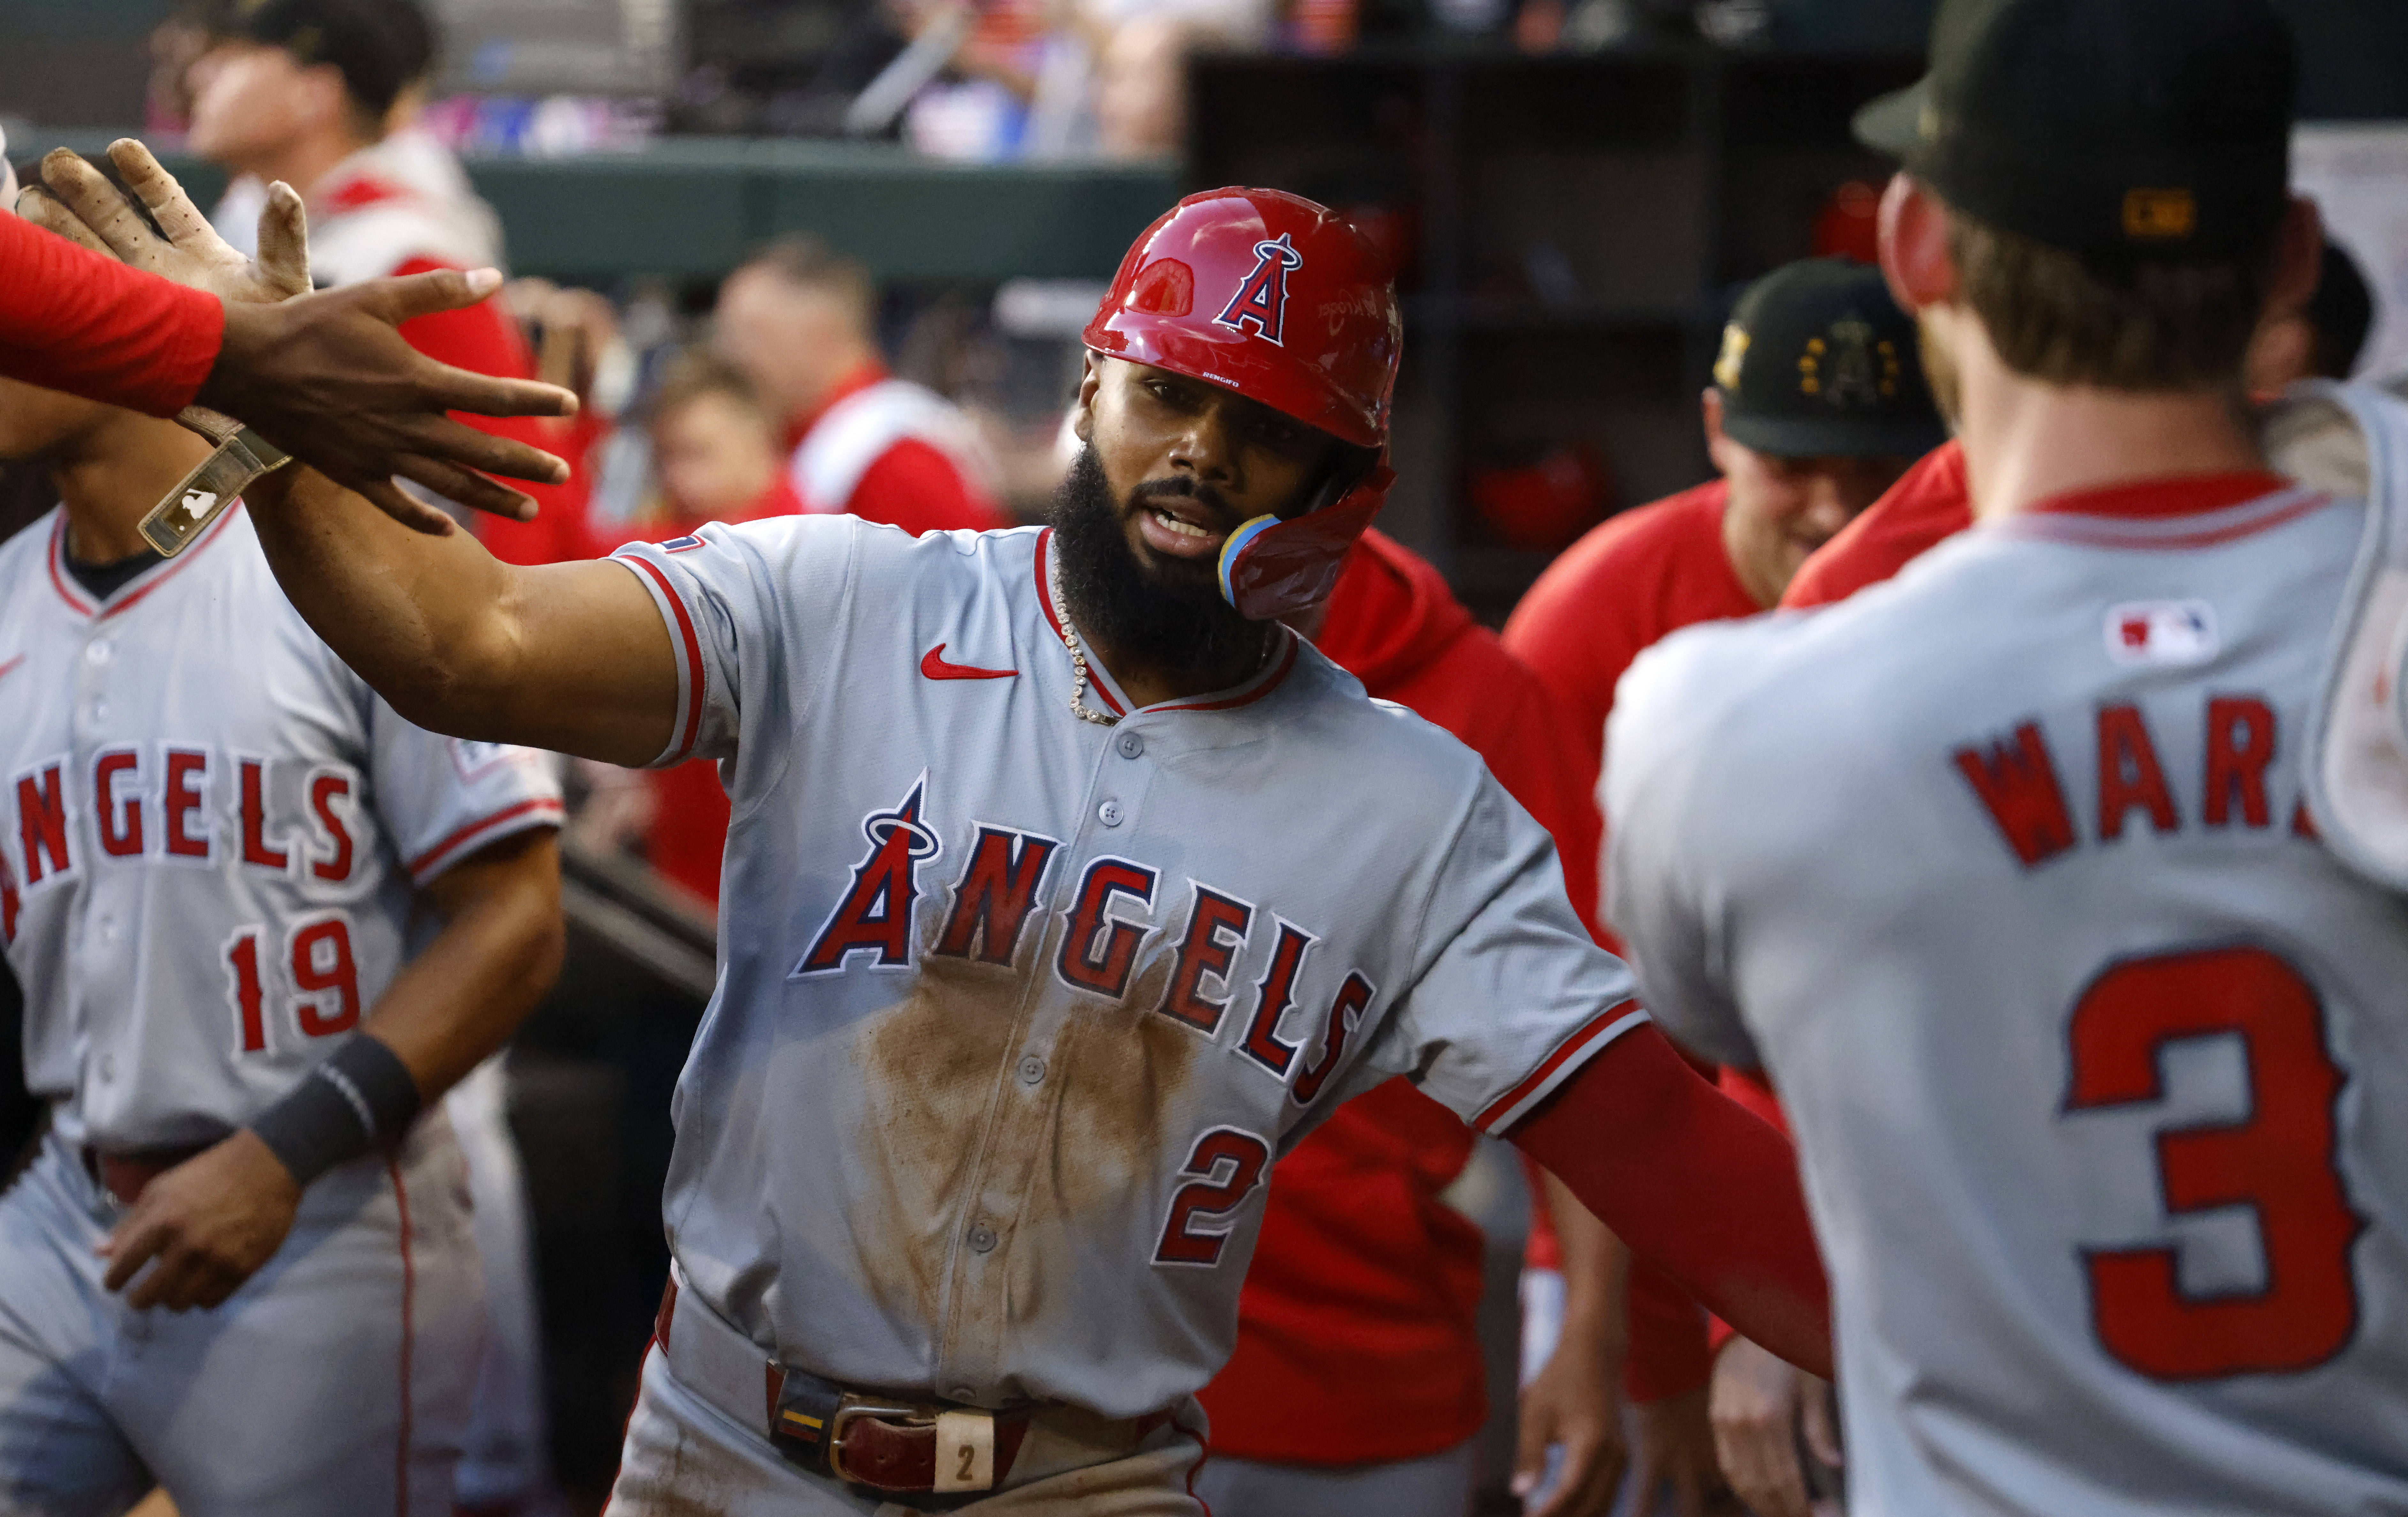 Angels beat Rangers to give Ron Washington win in his 1st game as
visiting manager in Texas